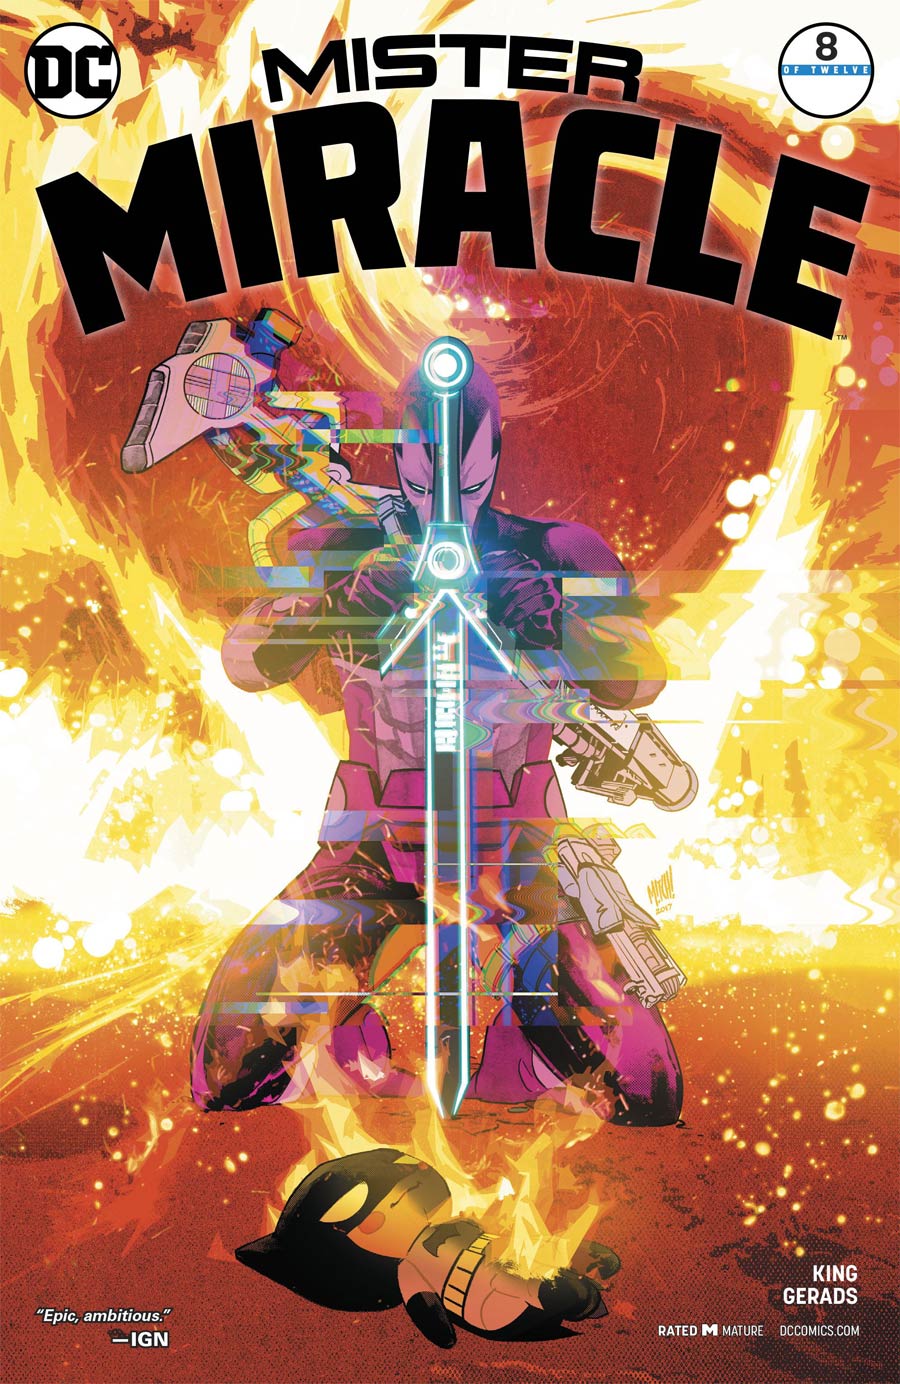 Mister Miracle Vol 4 #8 Cover B Variant Mitch Gerads Cover